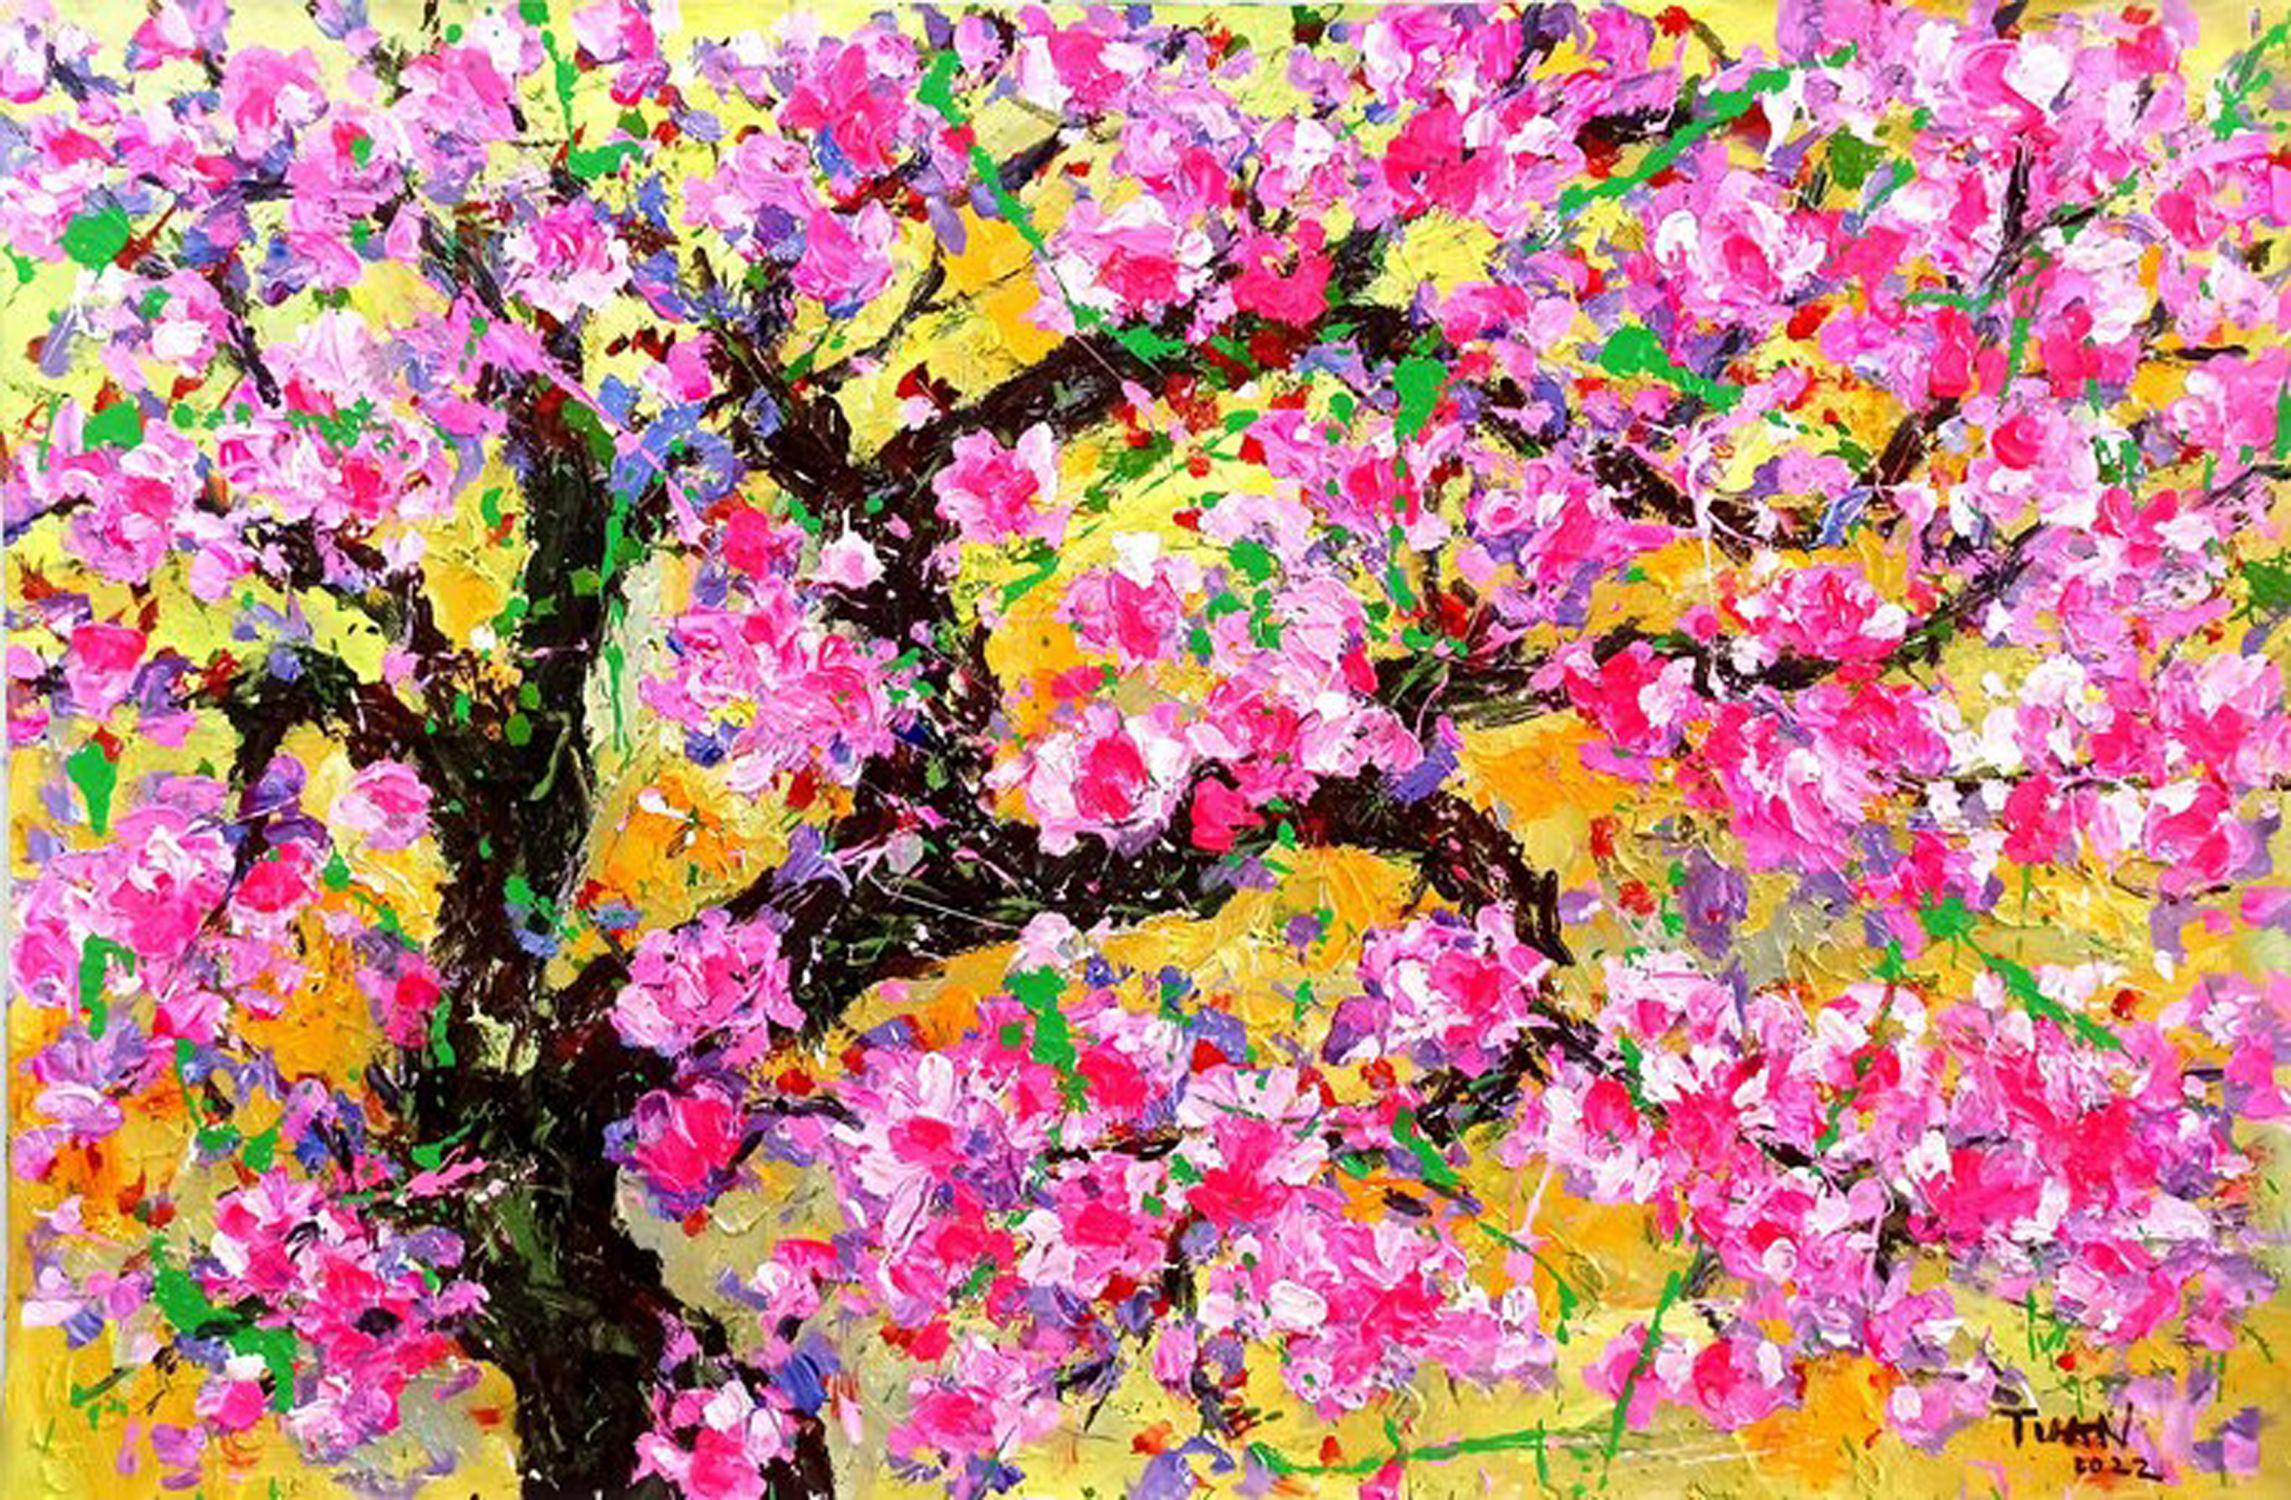   peach blossoms  Peach blossom is the most beautiful and popular flower in the North of Vietnam, loved by many people and displayed during Tet.  Peach tree is considered the quintessence of the Five Elements, according to feng shui this tree can